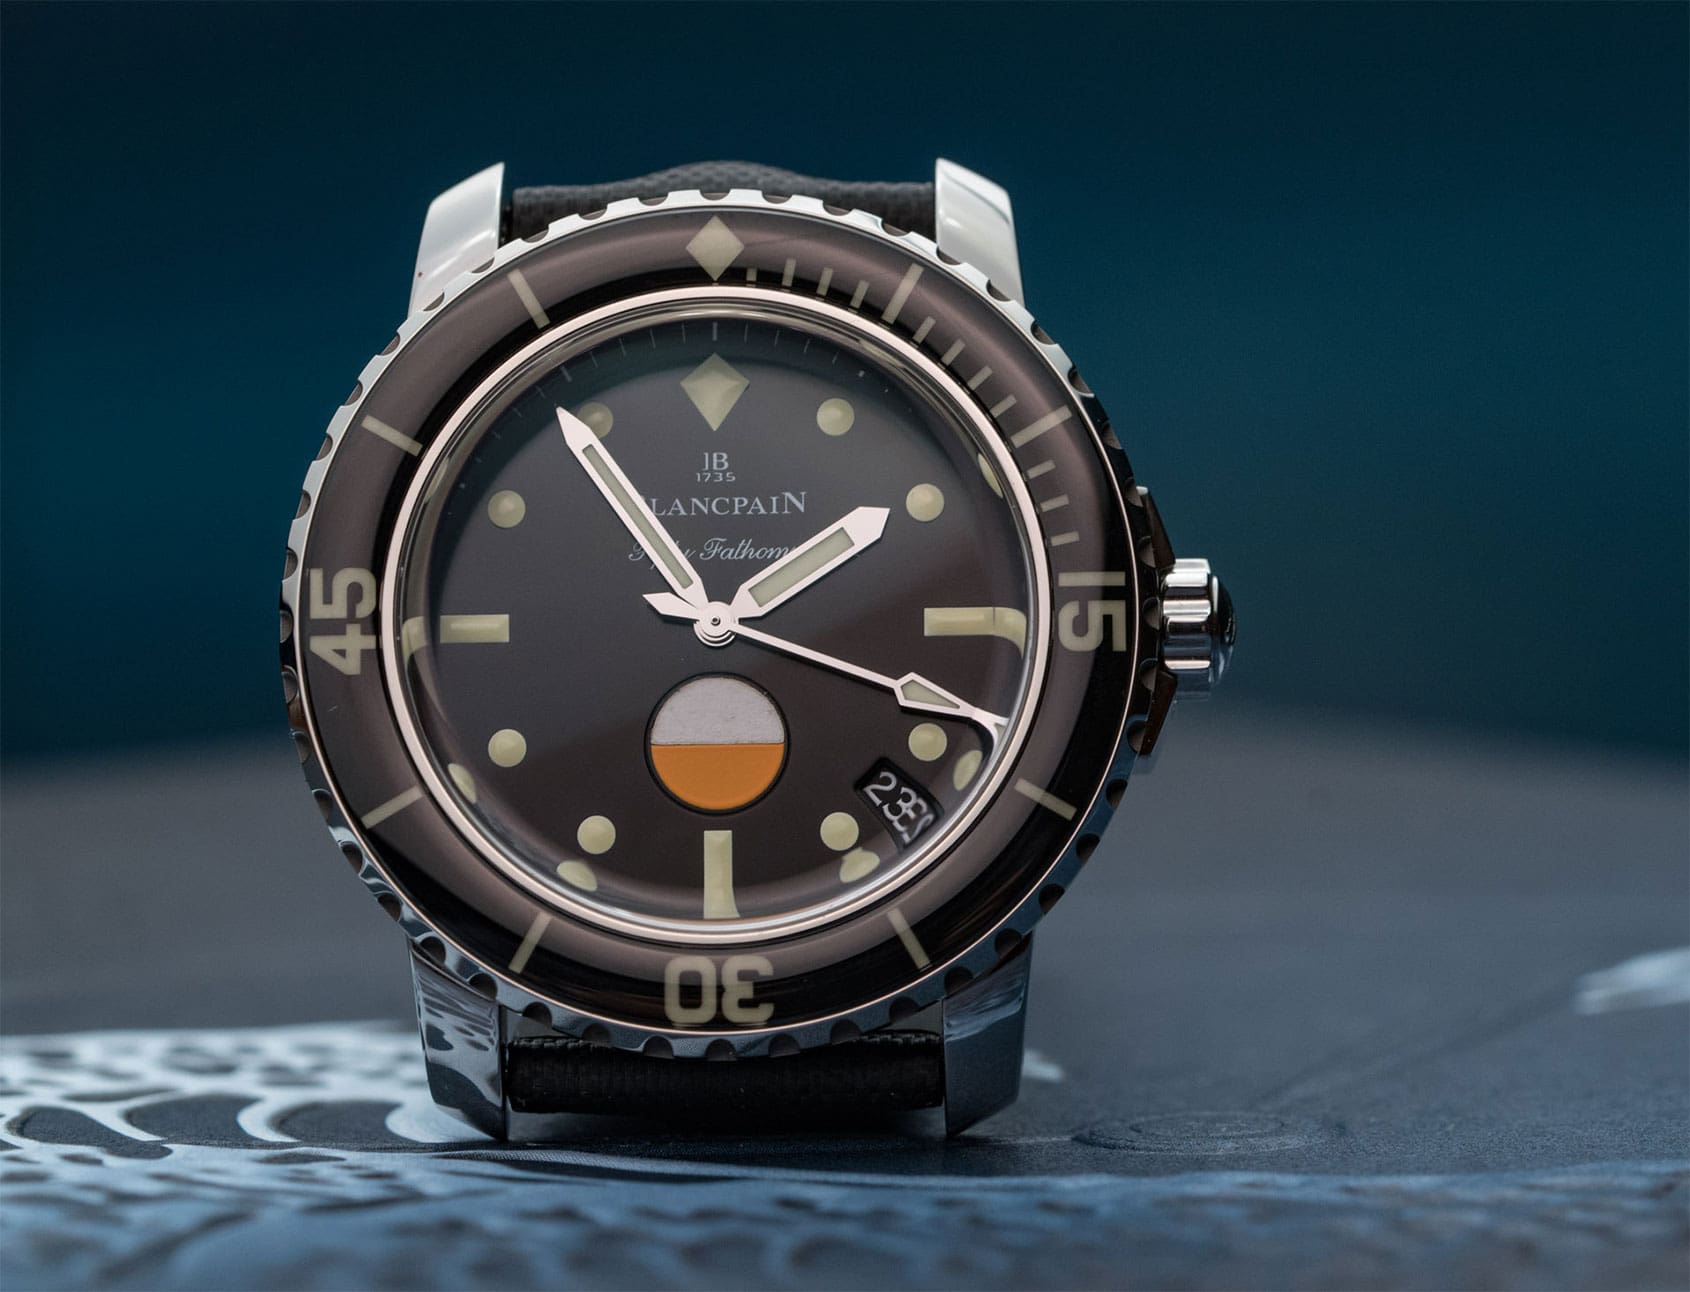 HANDS-ON: The Blancpain Tribute to Fifty Fathoms MIL-SPEC – a modern take on military style